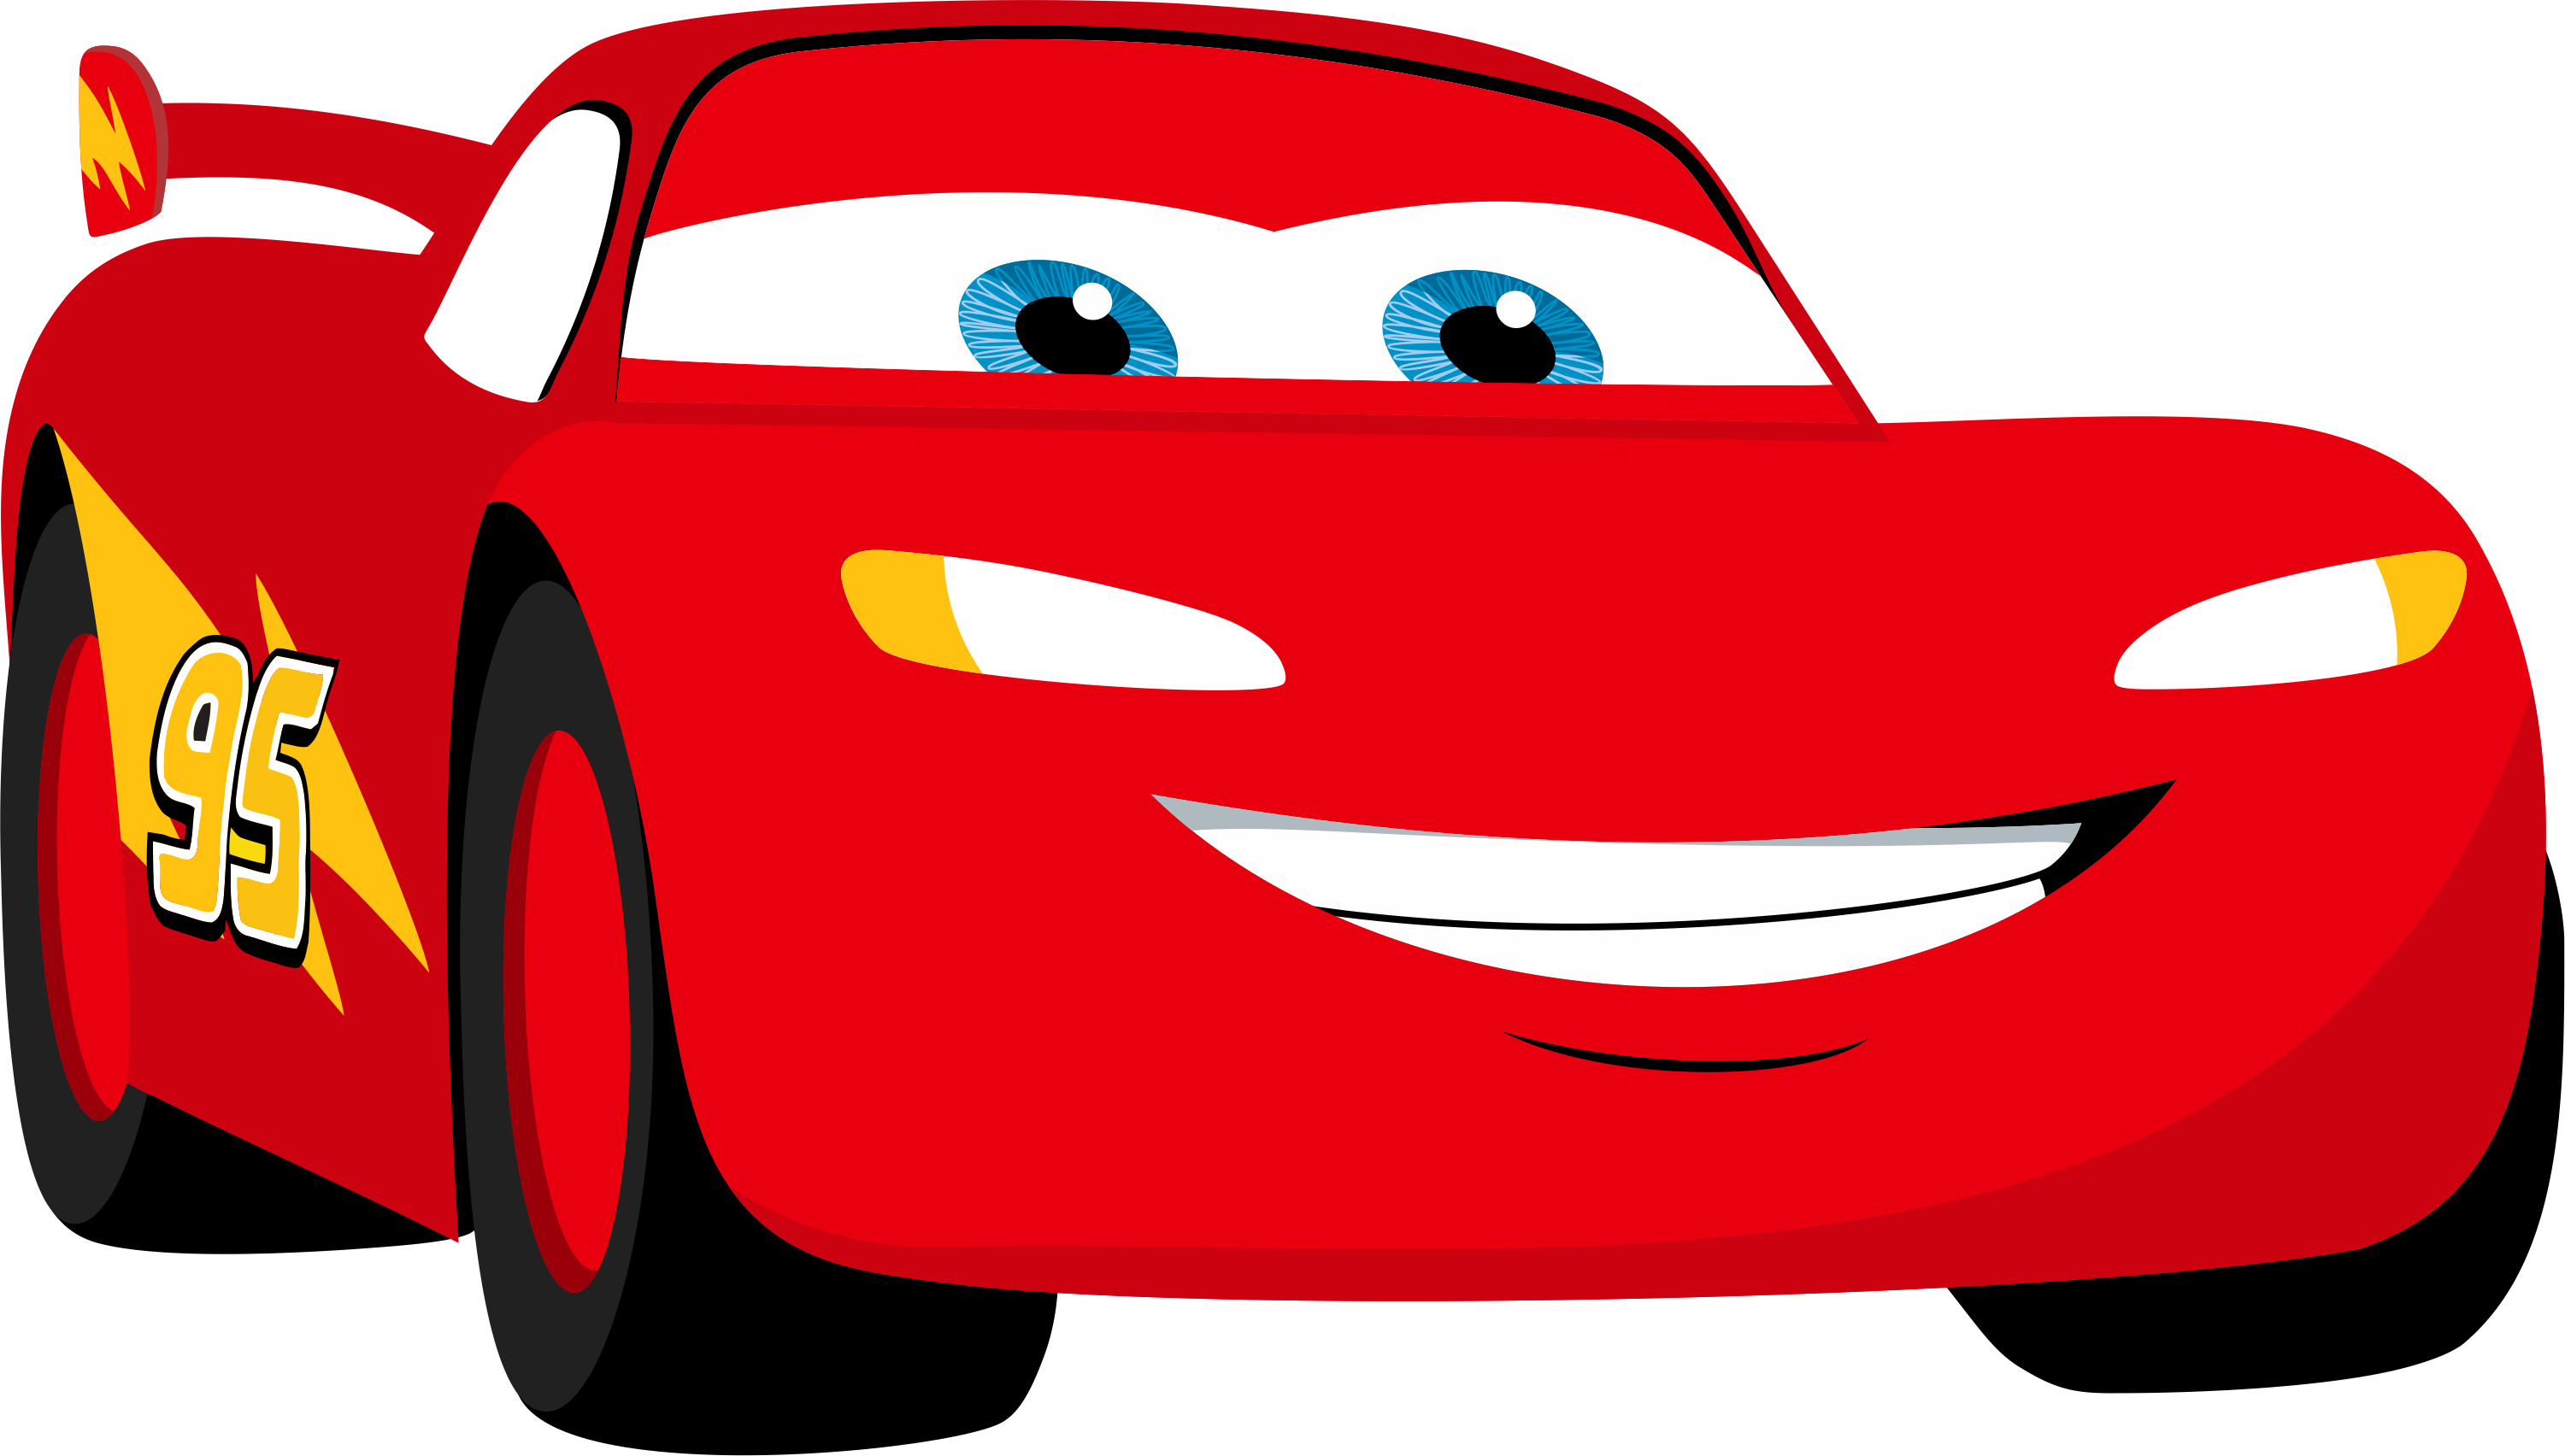 5969 Cars free clipart.